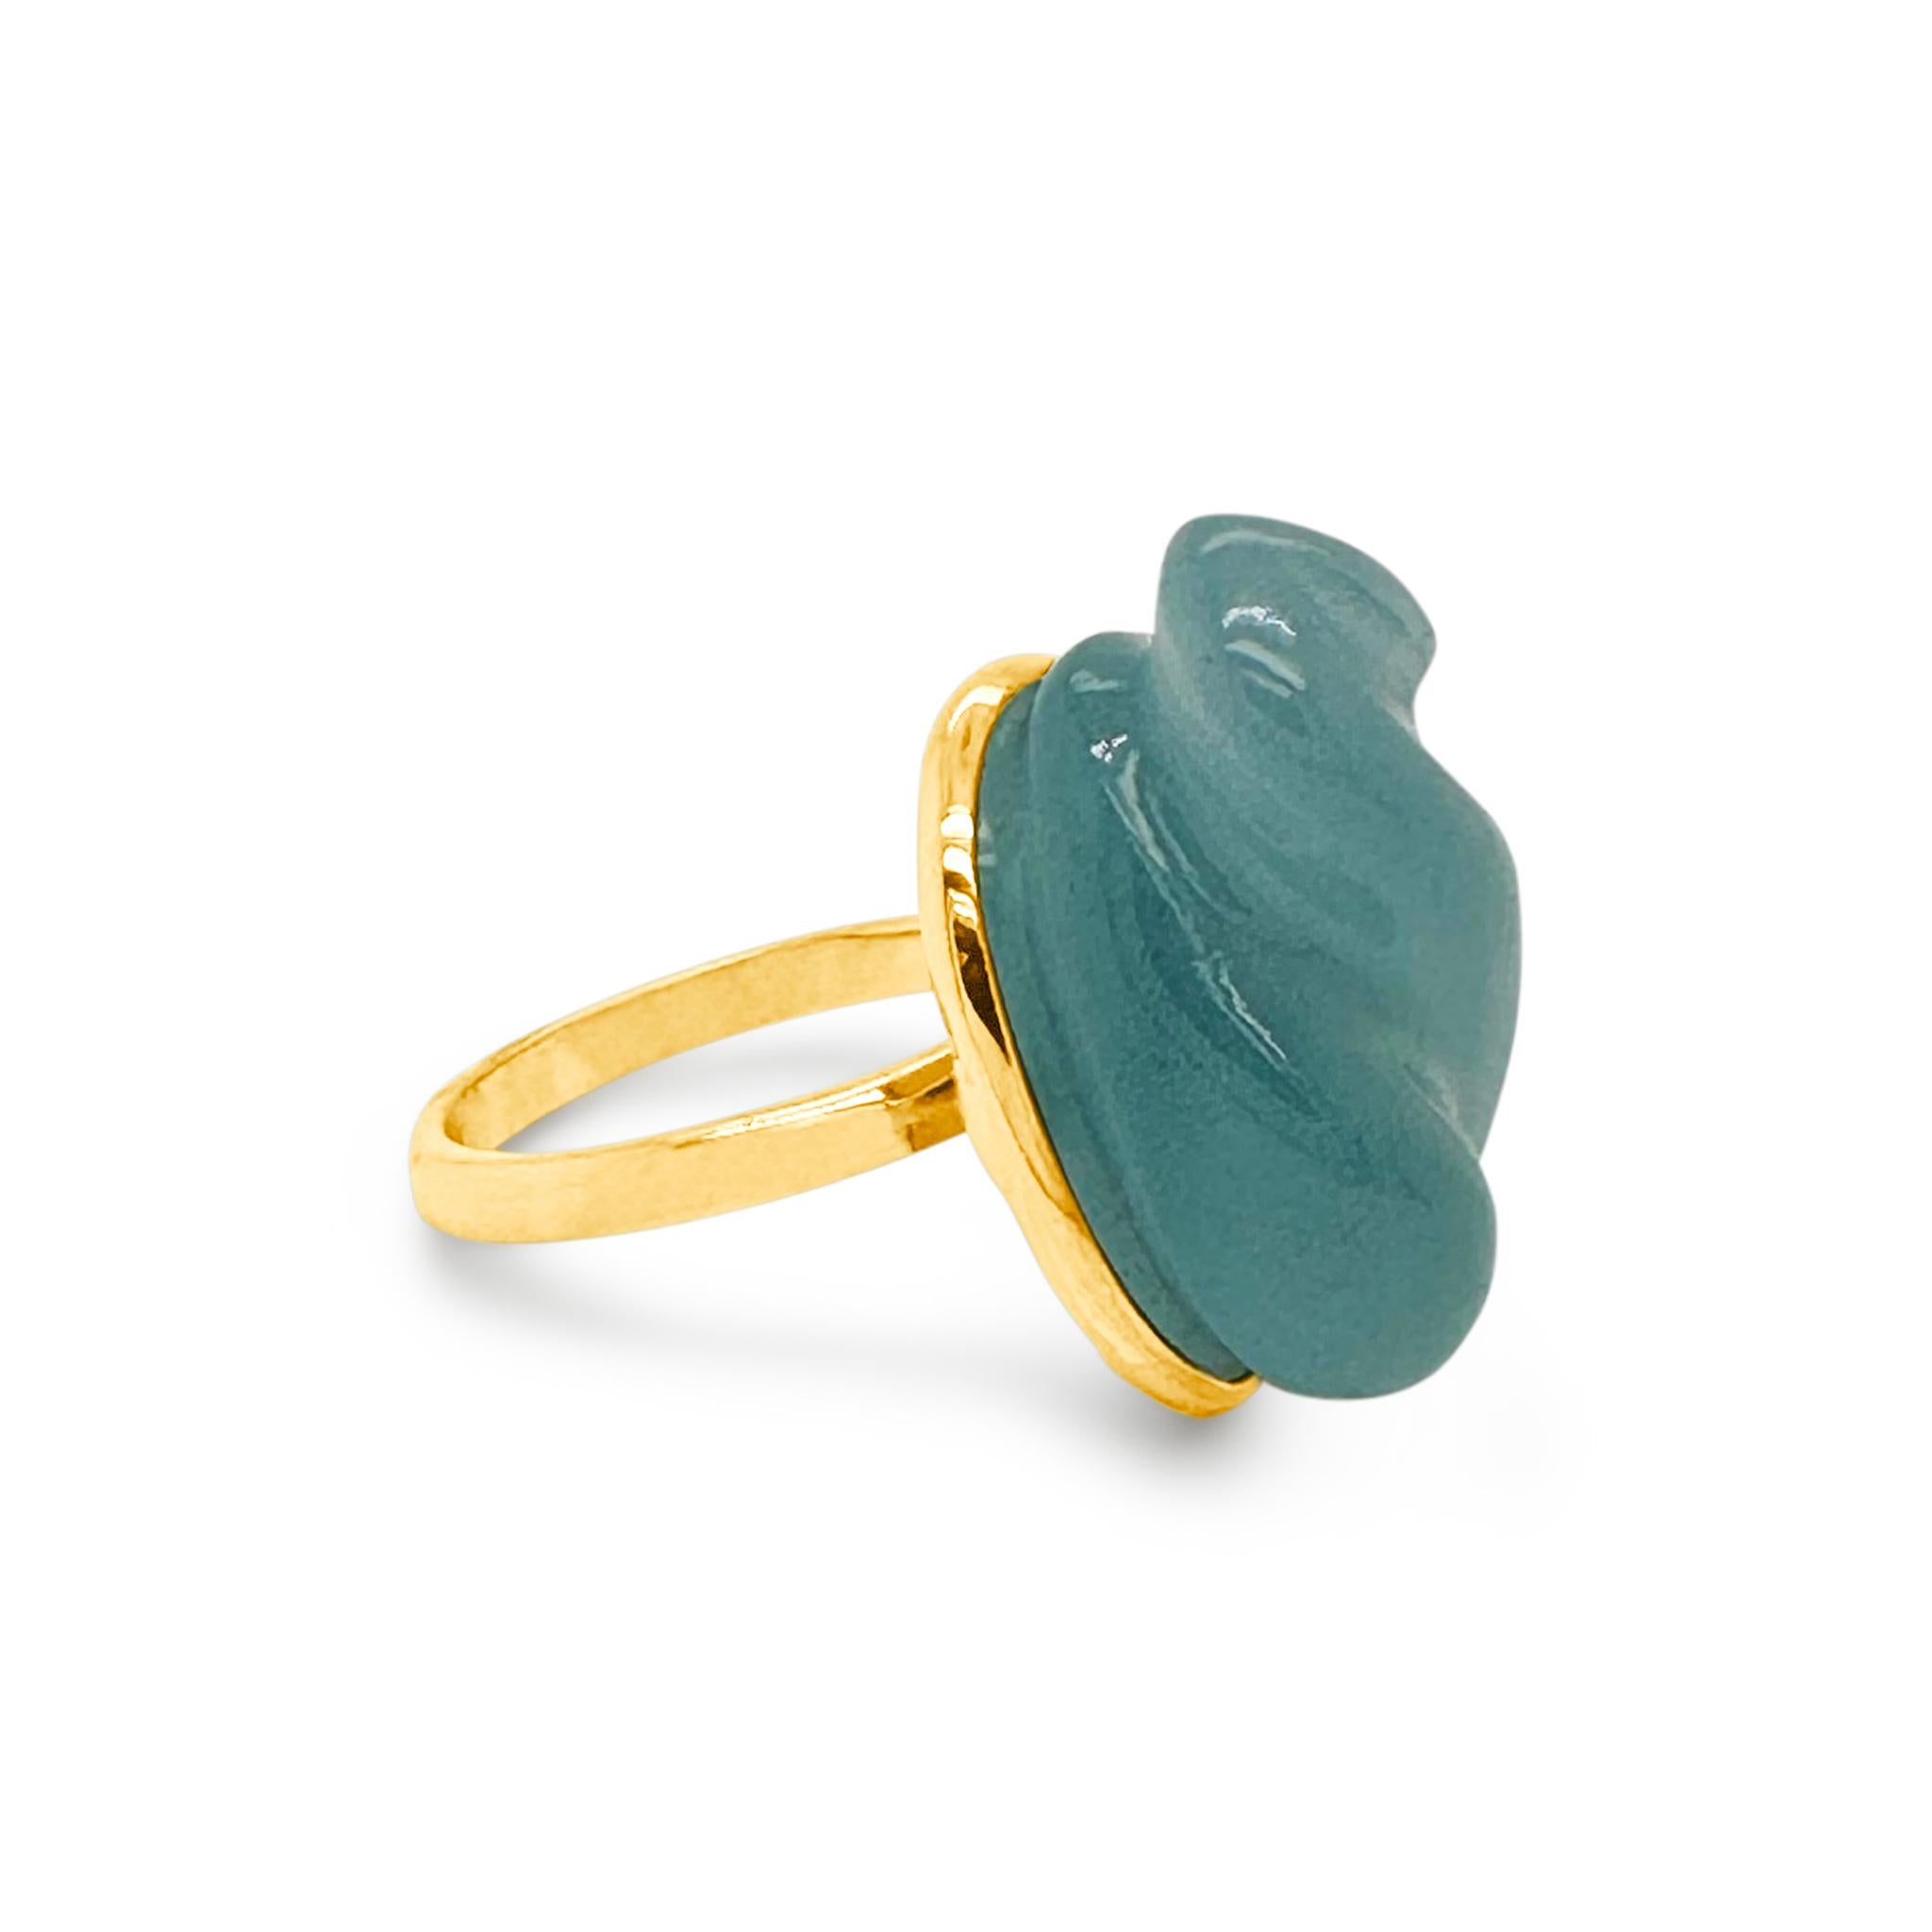 Tresor Beautiful Ring feature 29.77 total carats of Aquamarine. The Ring are an ode to the luxurious yet classic beauty with sparkly gemstones and feminine hues. Their contemporary and modern design make them perfect and versatile to be worn at any